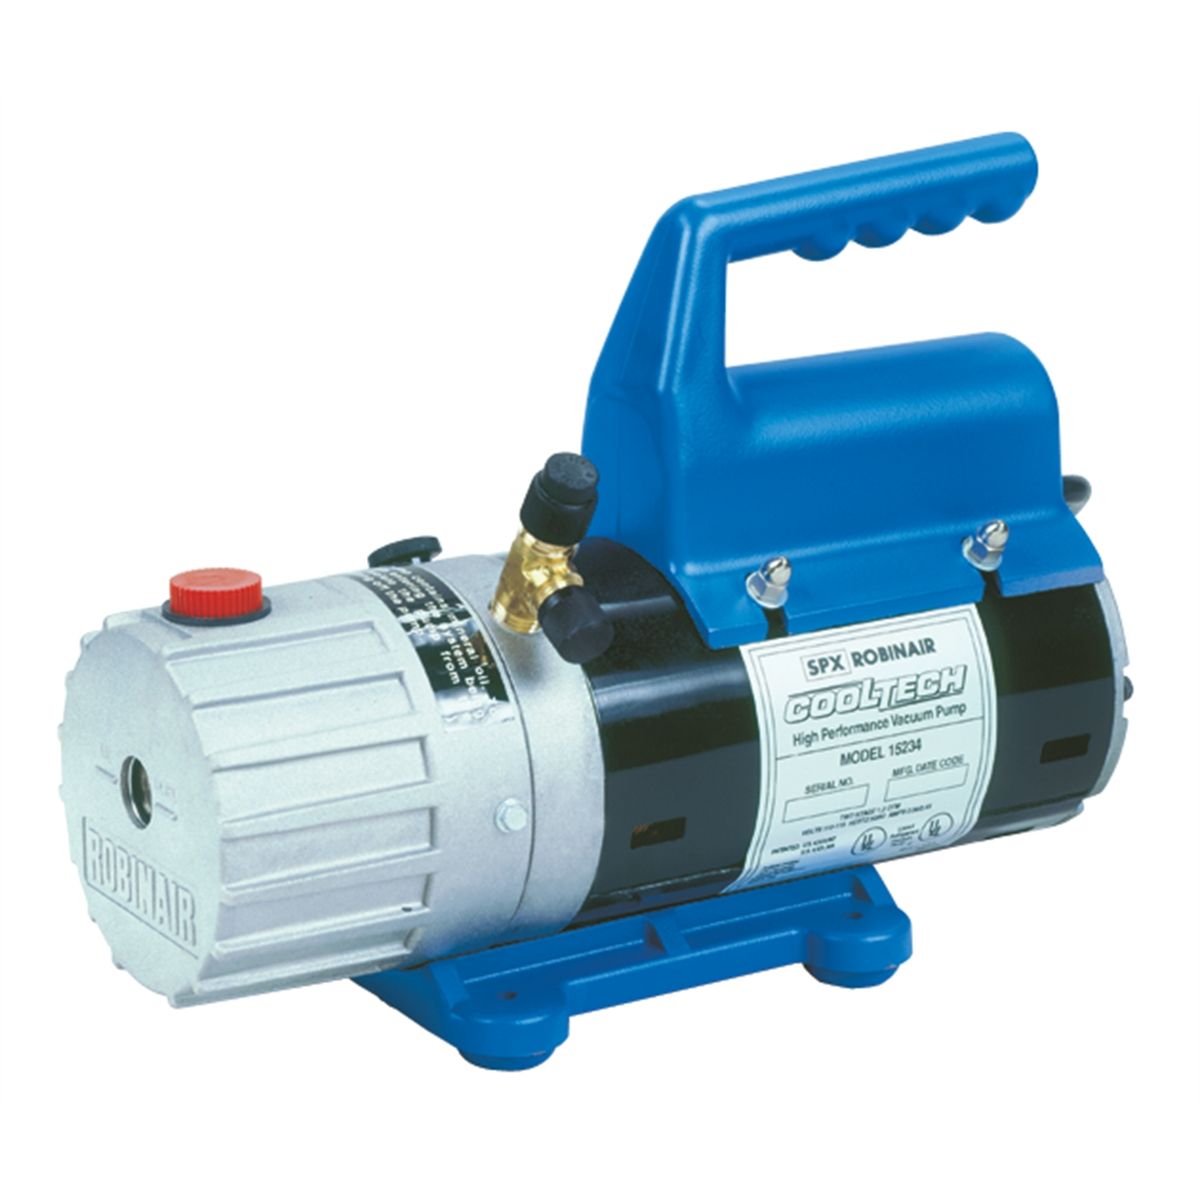 z-n/a CoolTech Two Stage Vacuum Pump - 1.2 CFM...